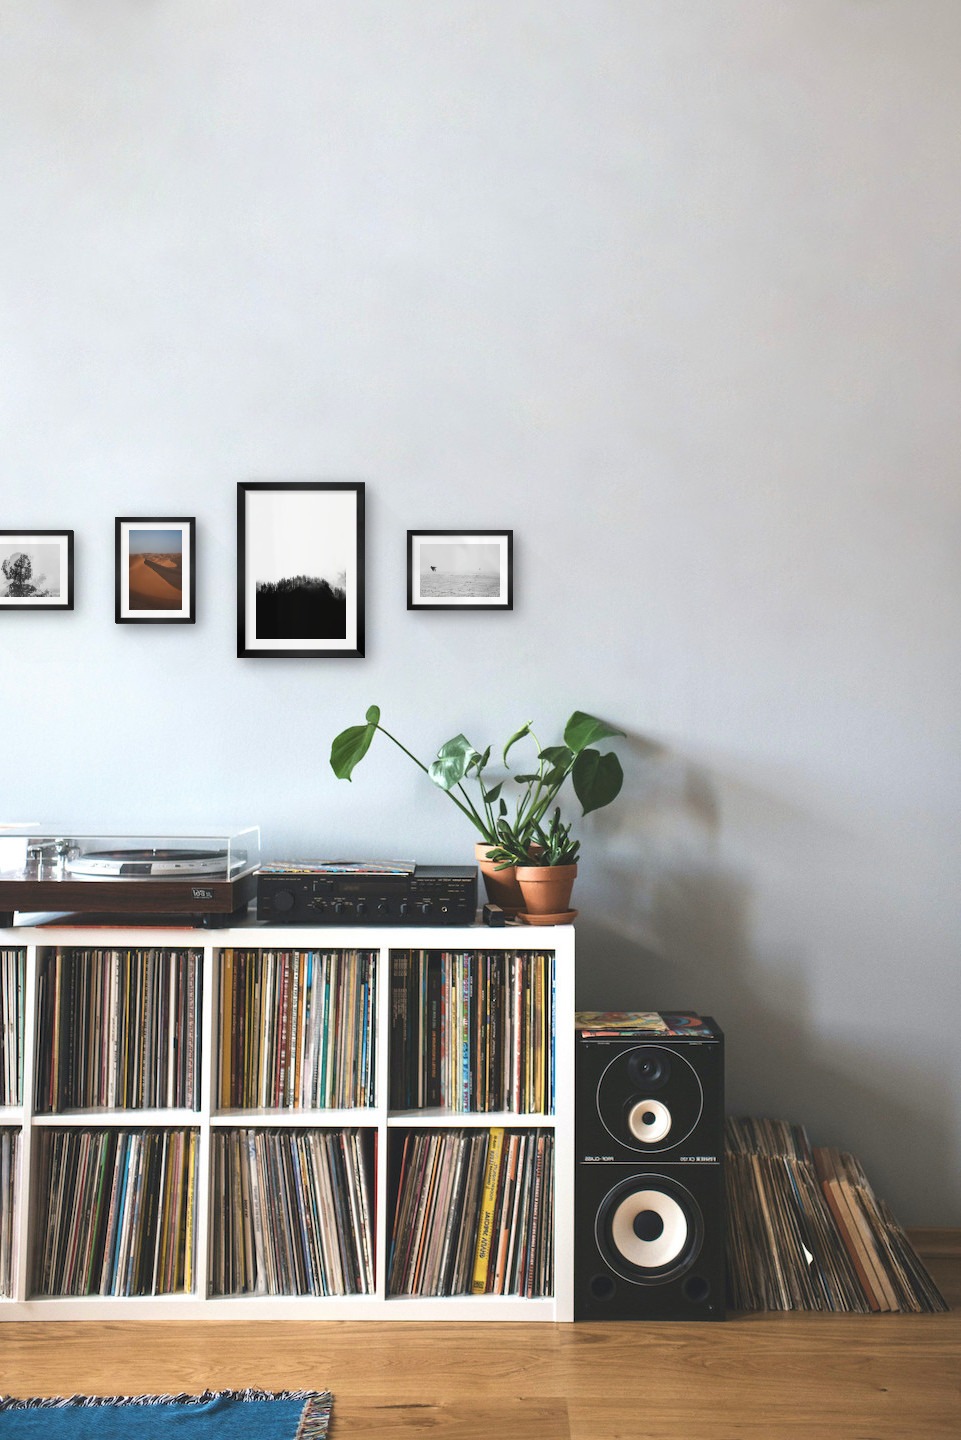 Gallery wall with picture frames in black in sizes 13x18 and 21x30 with prints "Trees and silhouette", "Desert", "Wooden tops and fog" and "Birds over the sea"